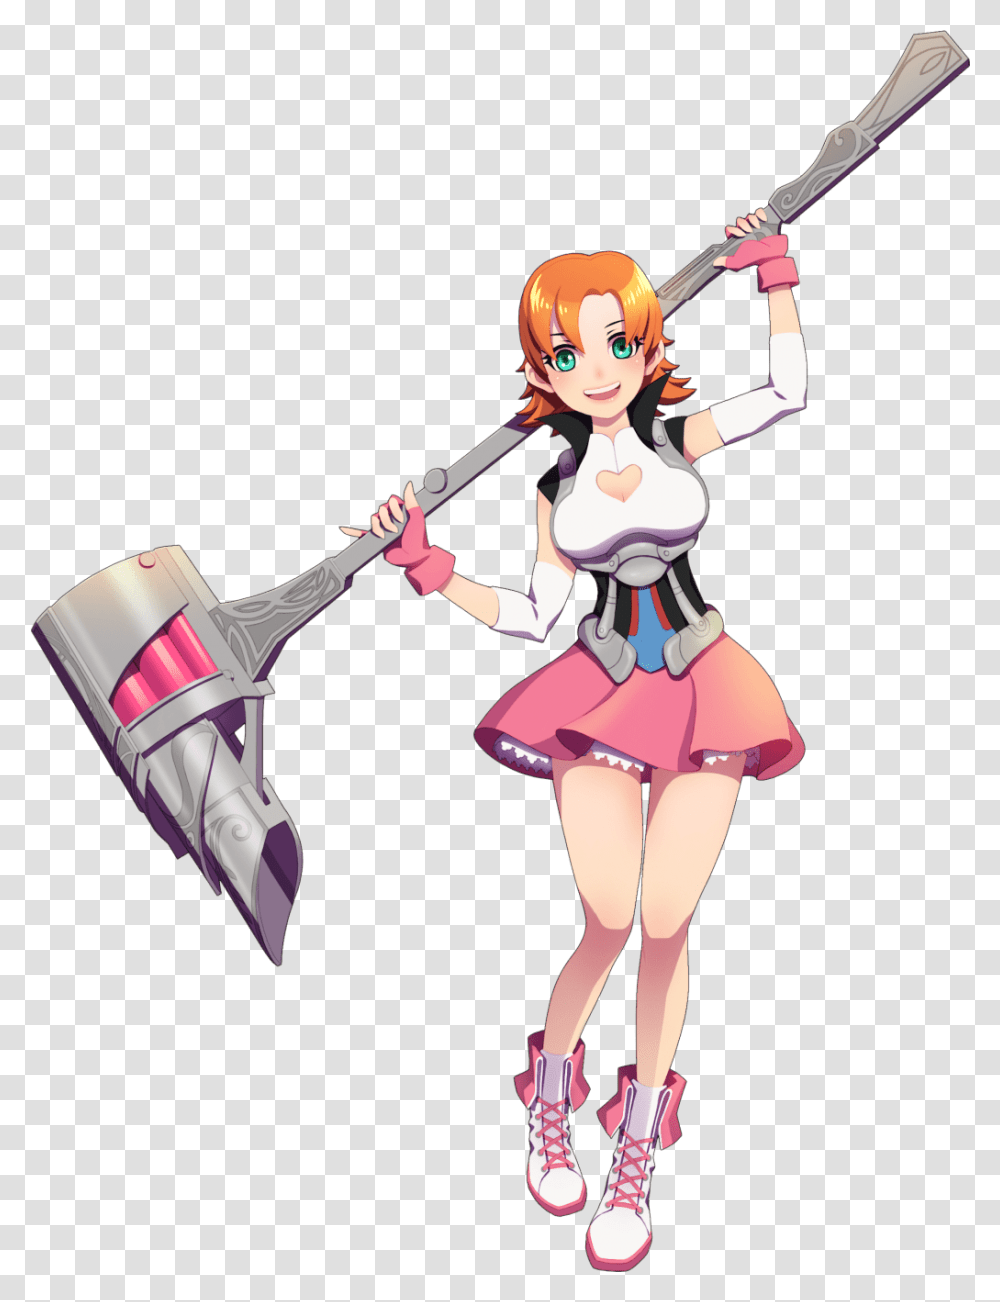 Rwby Amity Arena Nora, Costume, Person, Book, Tennis Racket Transparent Png